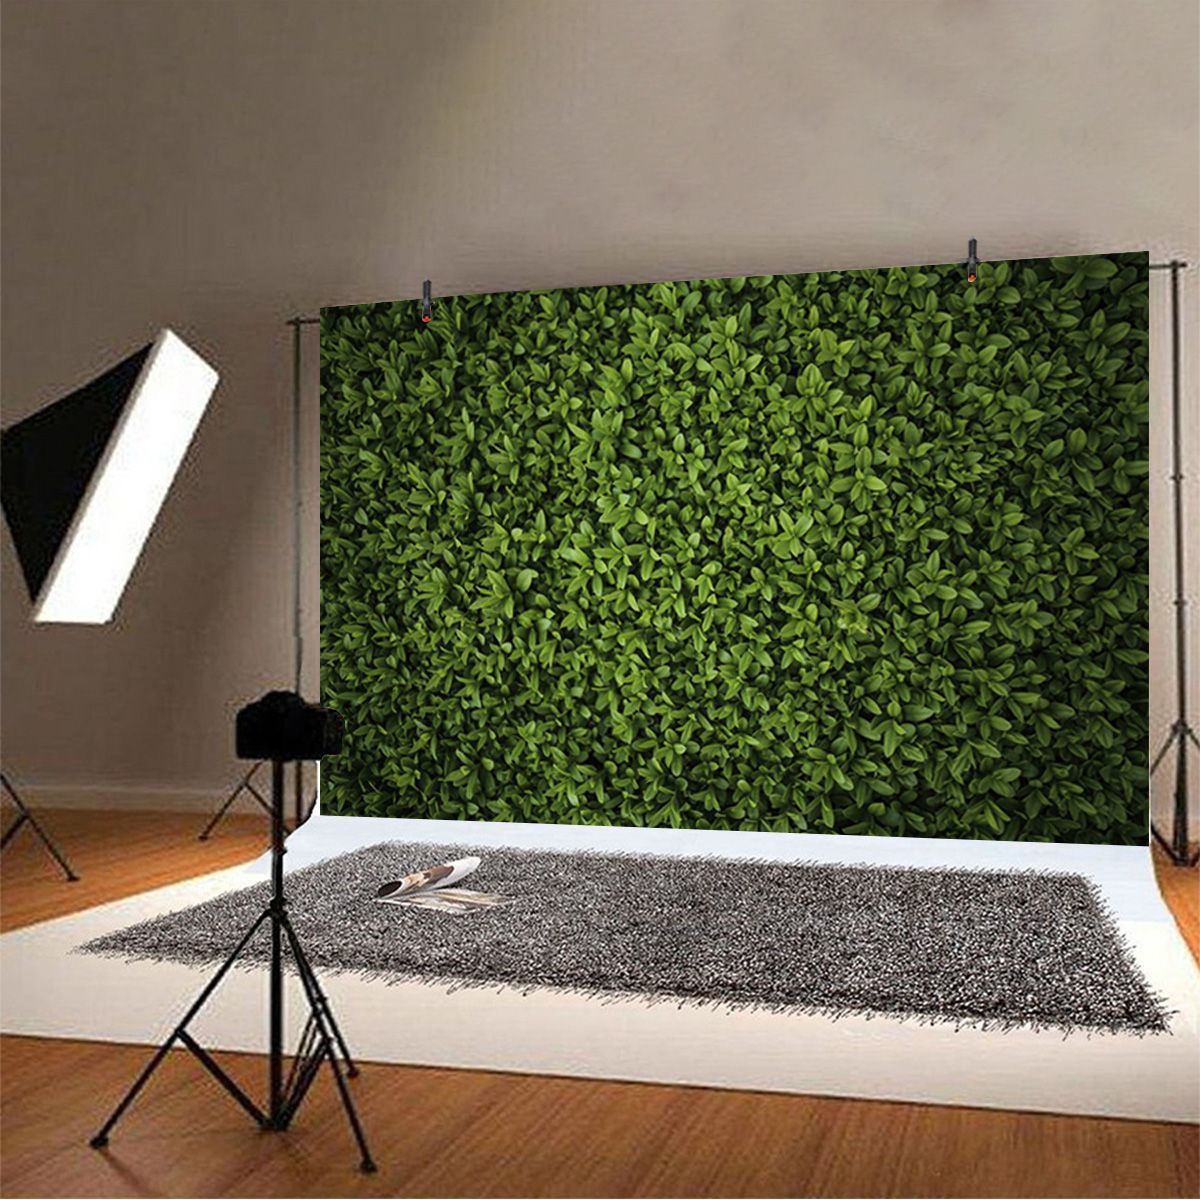 5x3ft-7x5ft-10x65ft-Green-Leaves-Wall-Backdrop-Photography-Wall-Decor-Background-for-Photo-Video-Wed-1670643